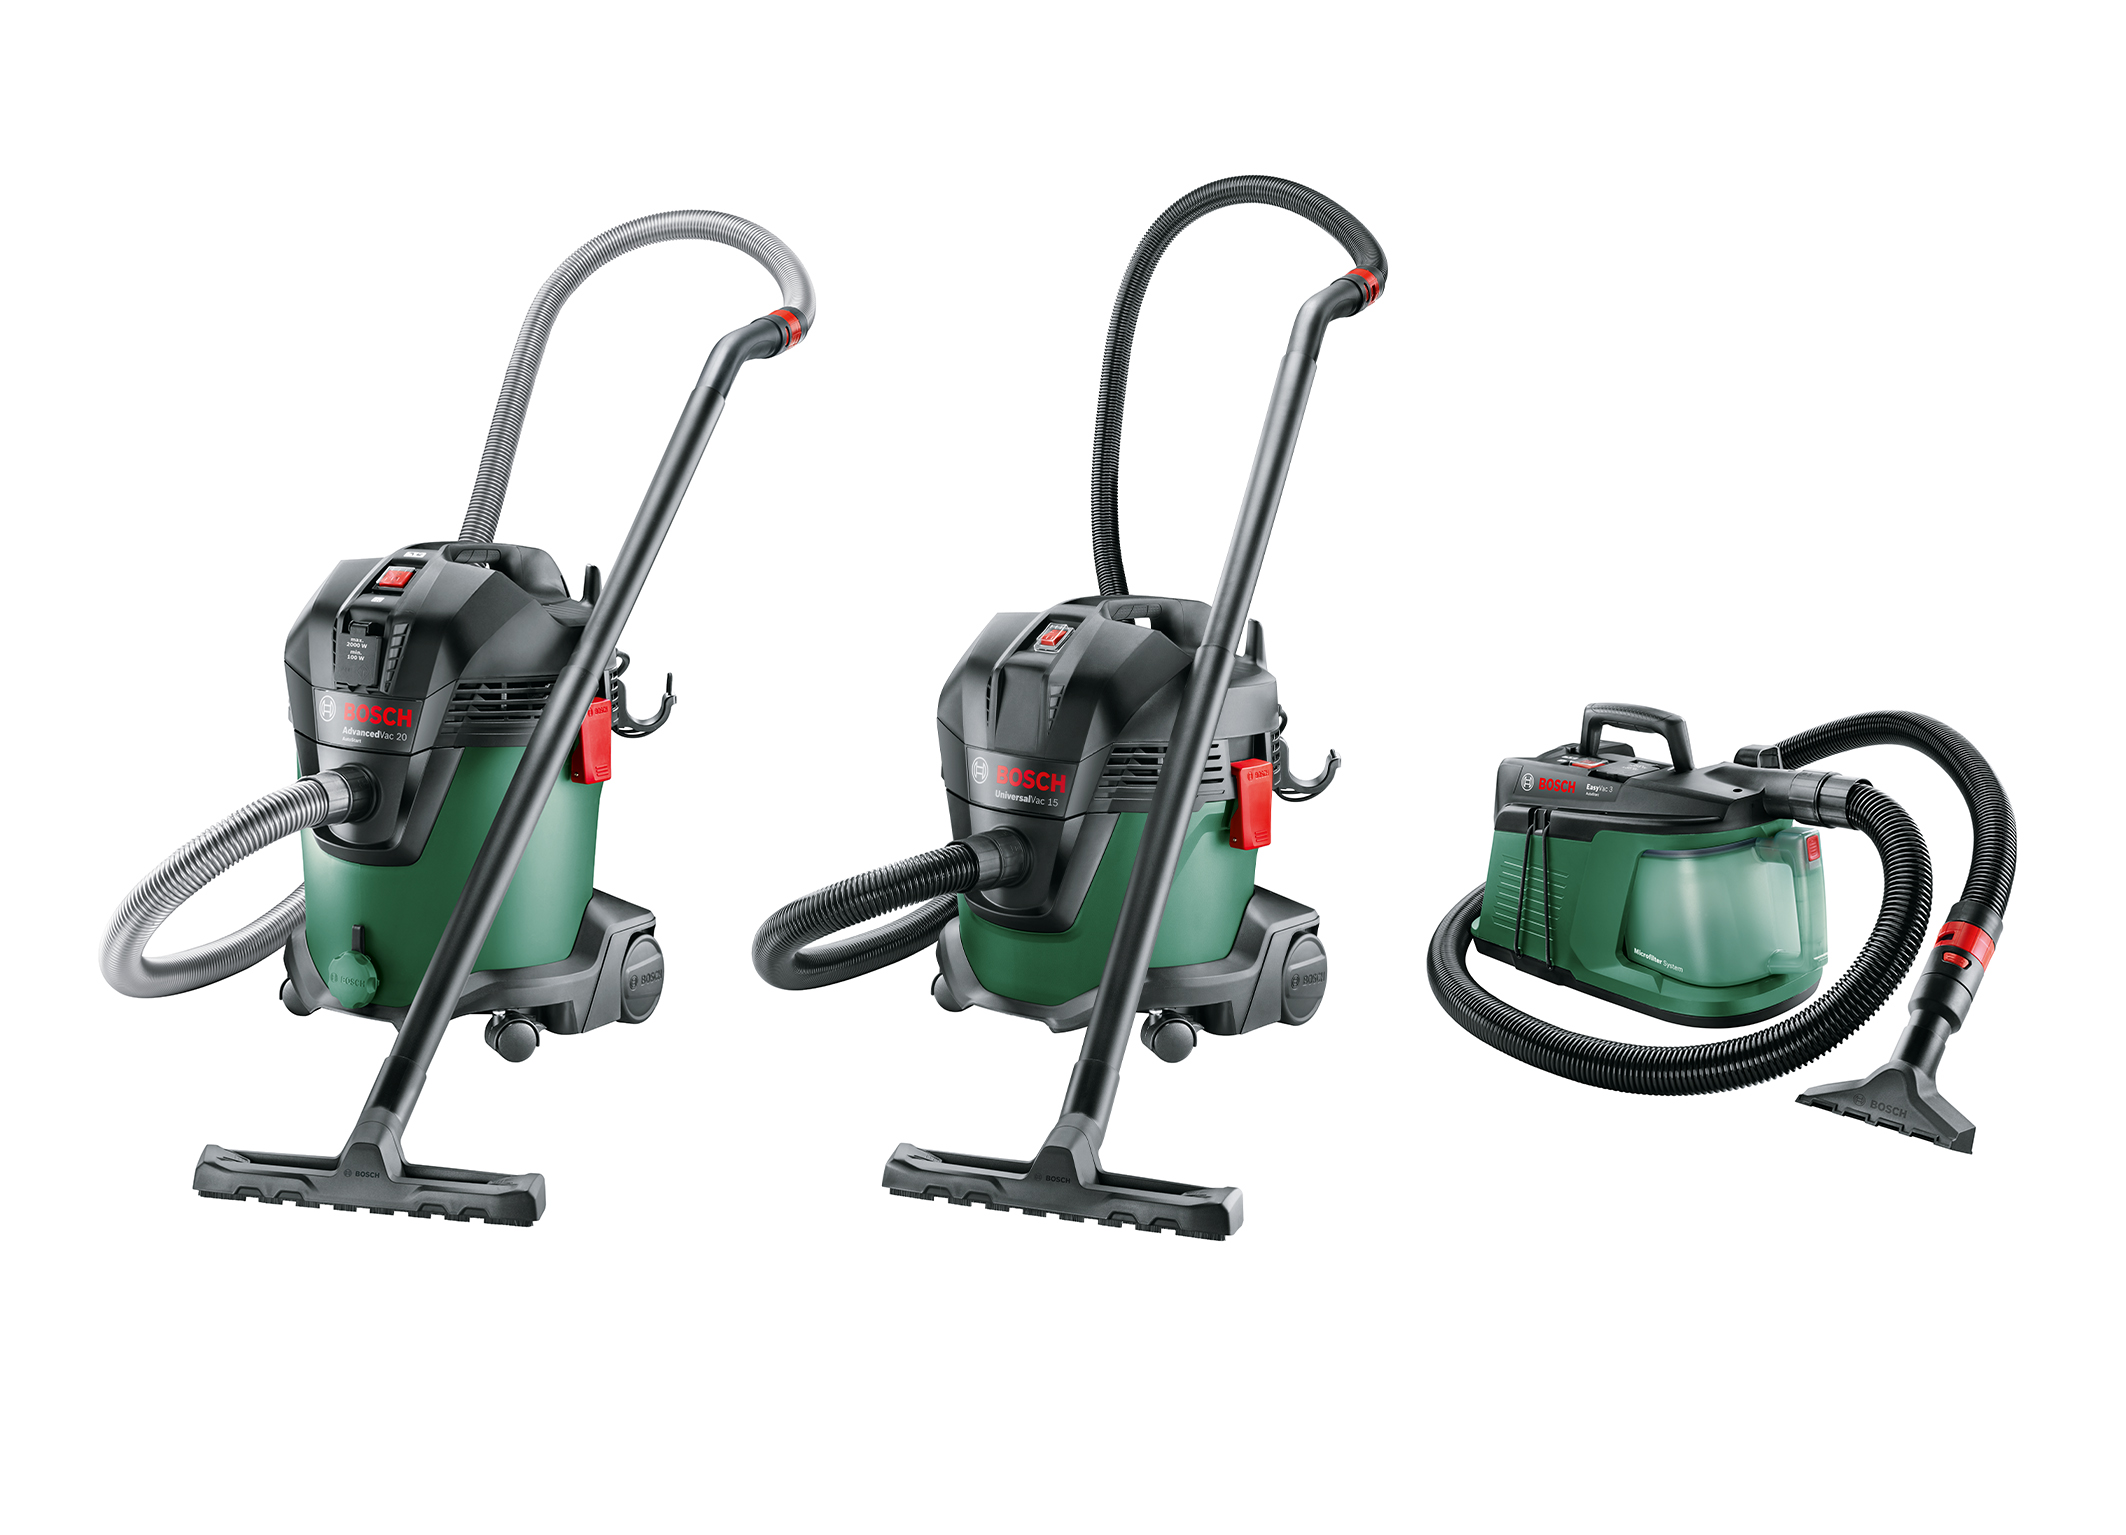 Small, compact and handy: new generation of Bosch vacuum cleaners for DIYers 